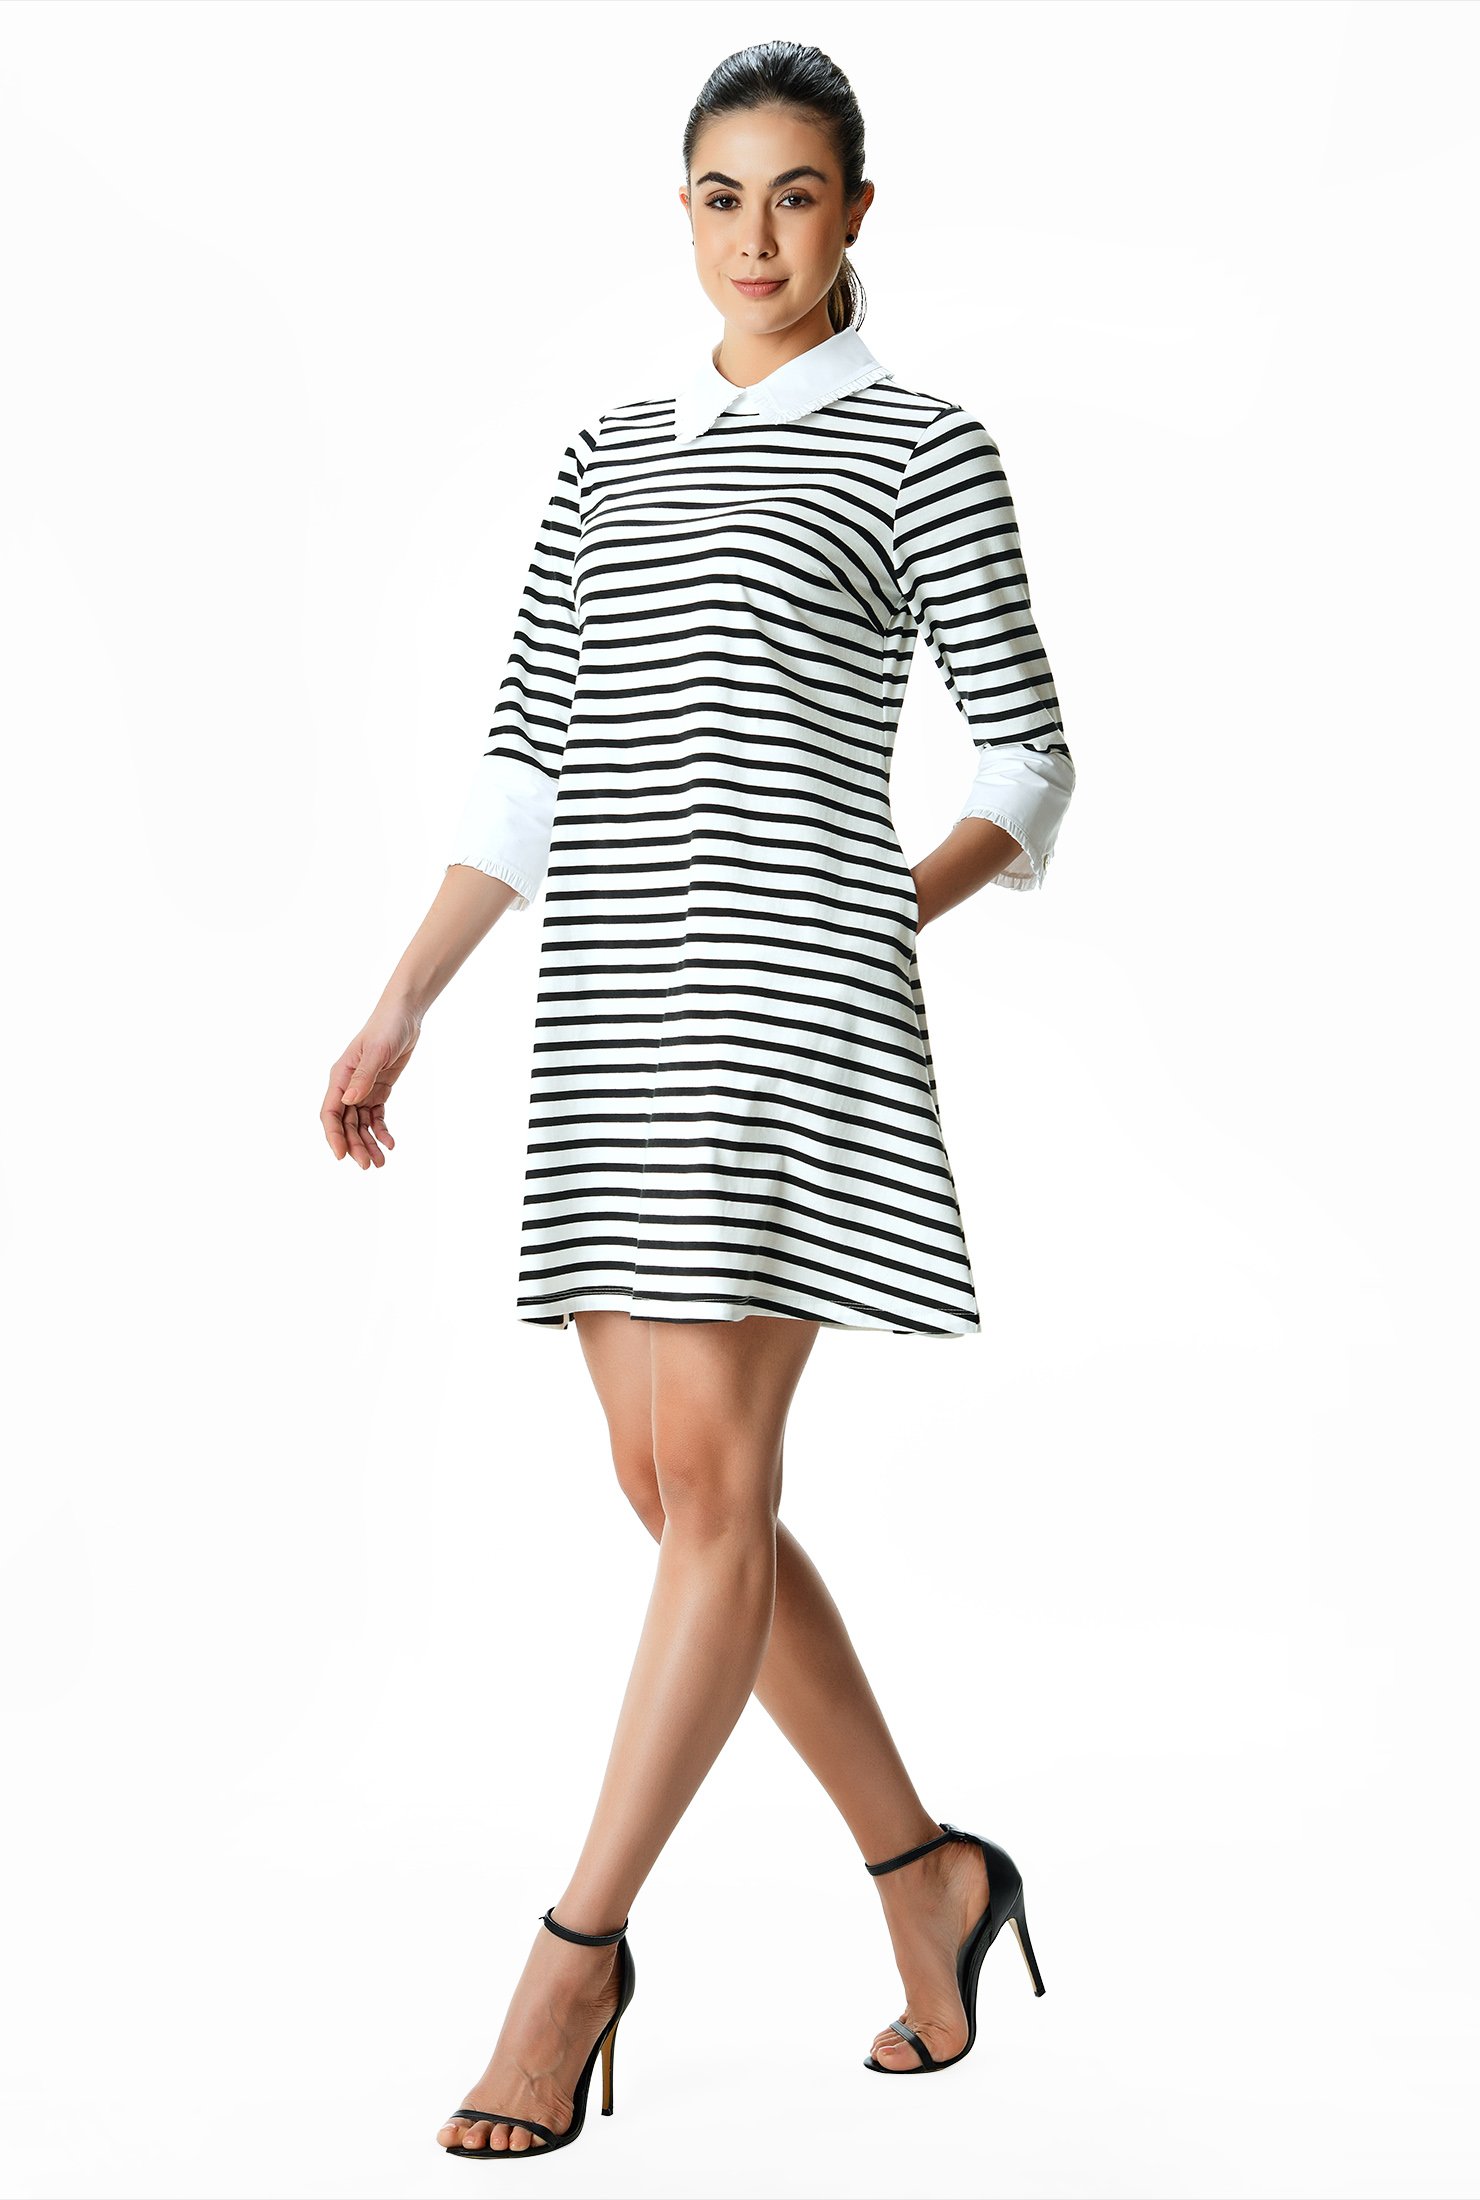 Our polished shift dress with a flared hem in contemporary stripe cotton jersey knit gets an air of retro-chic from a contrast collar and cuffs.